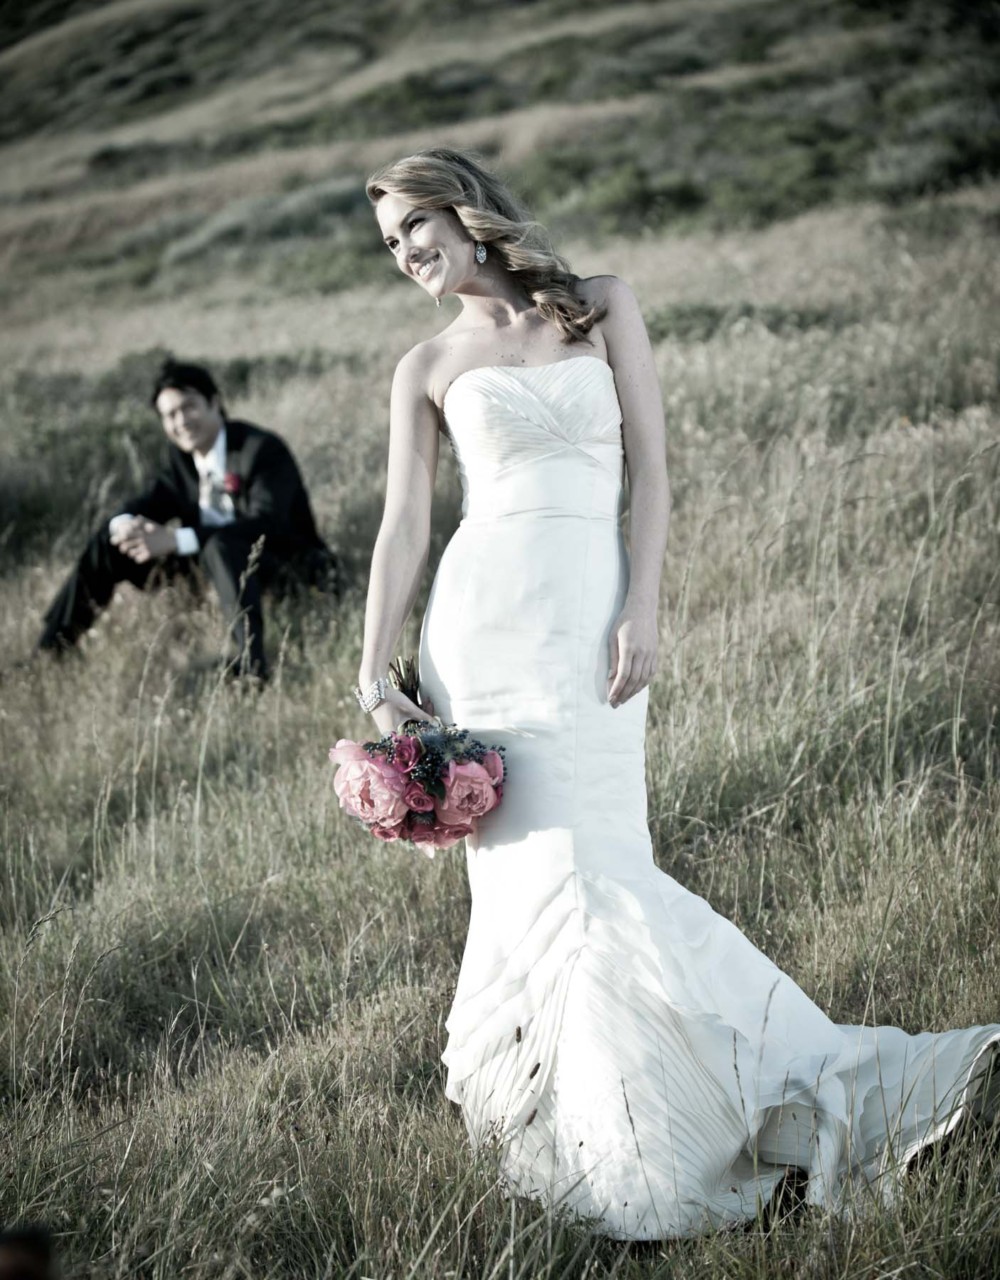 Looking for a affordable wedding photographer in Chugiak?